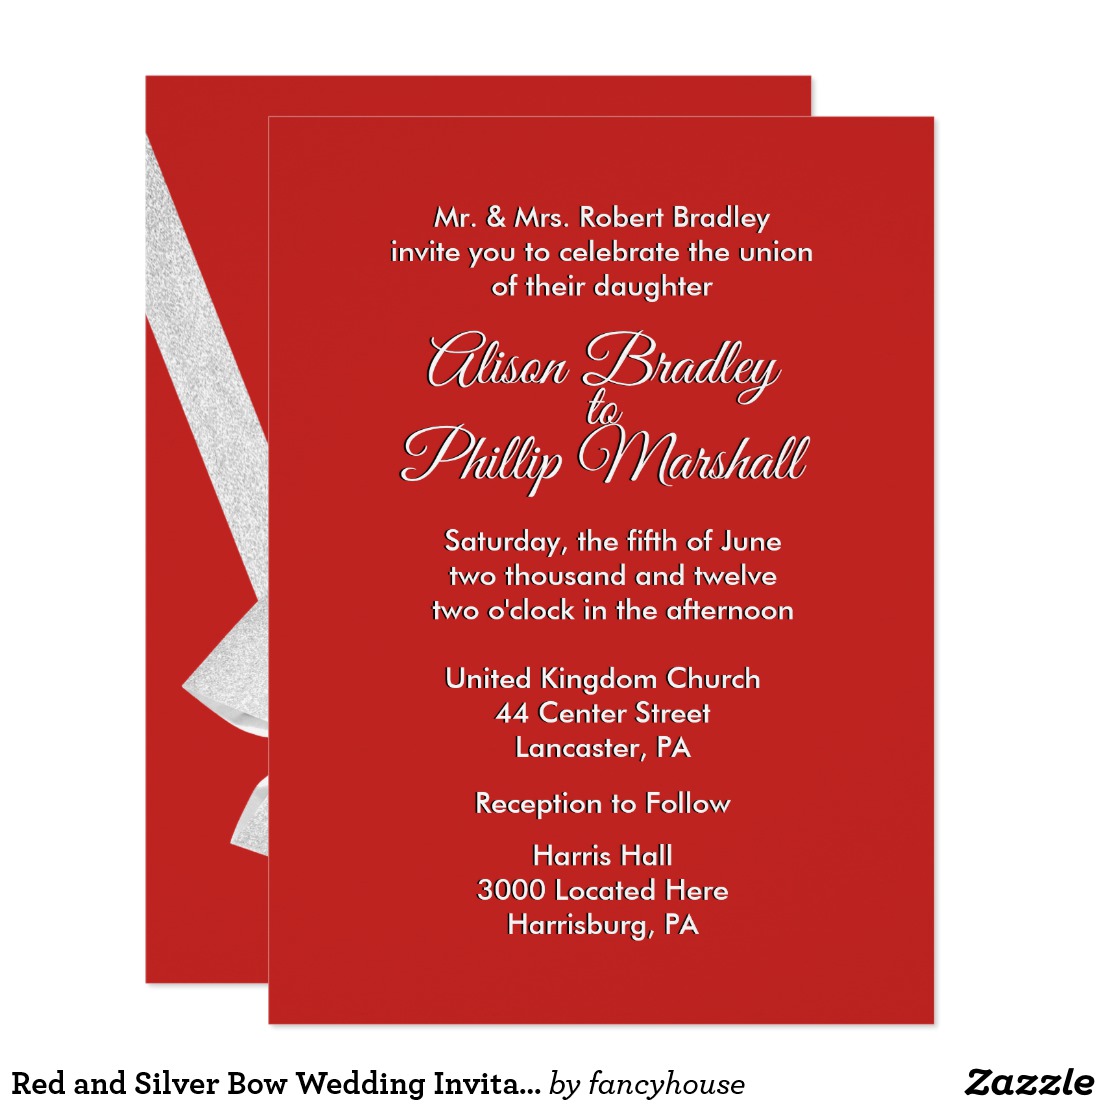 Red and Silver Bow Wedding Invitation